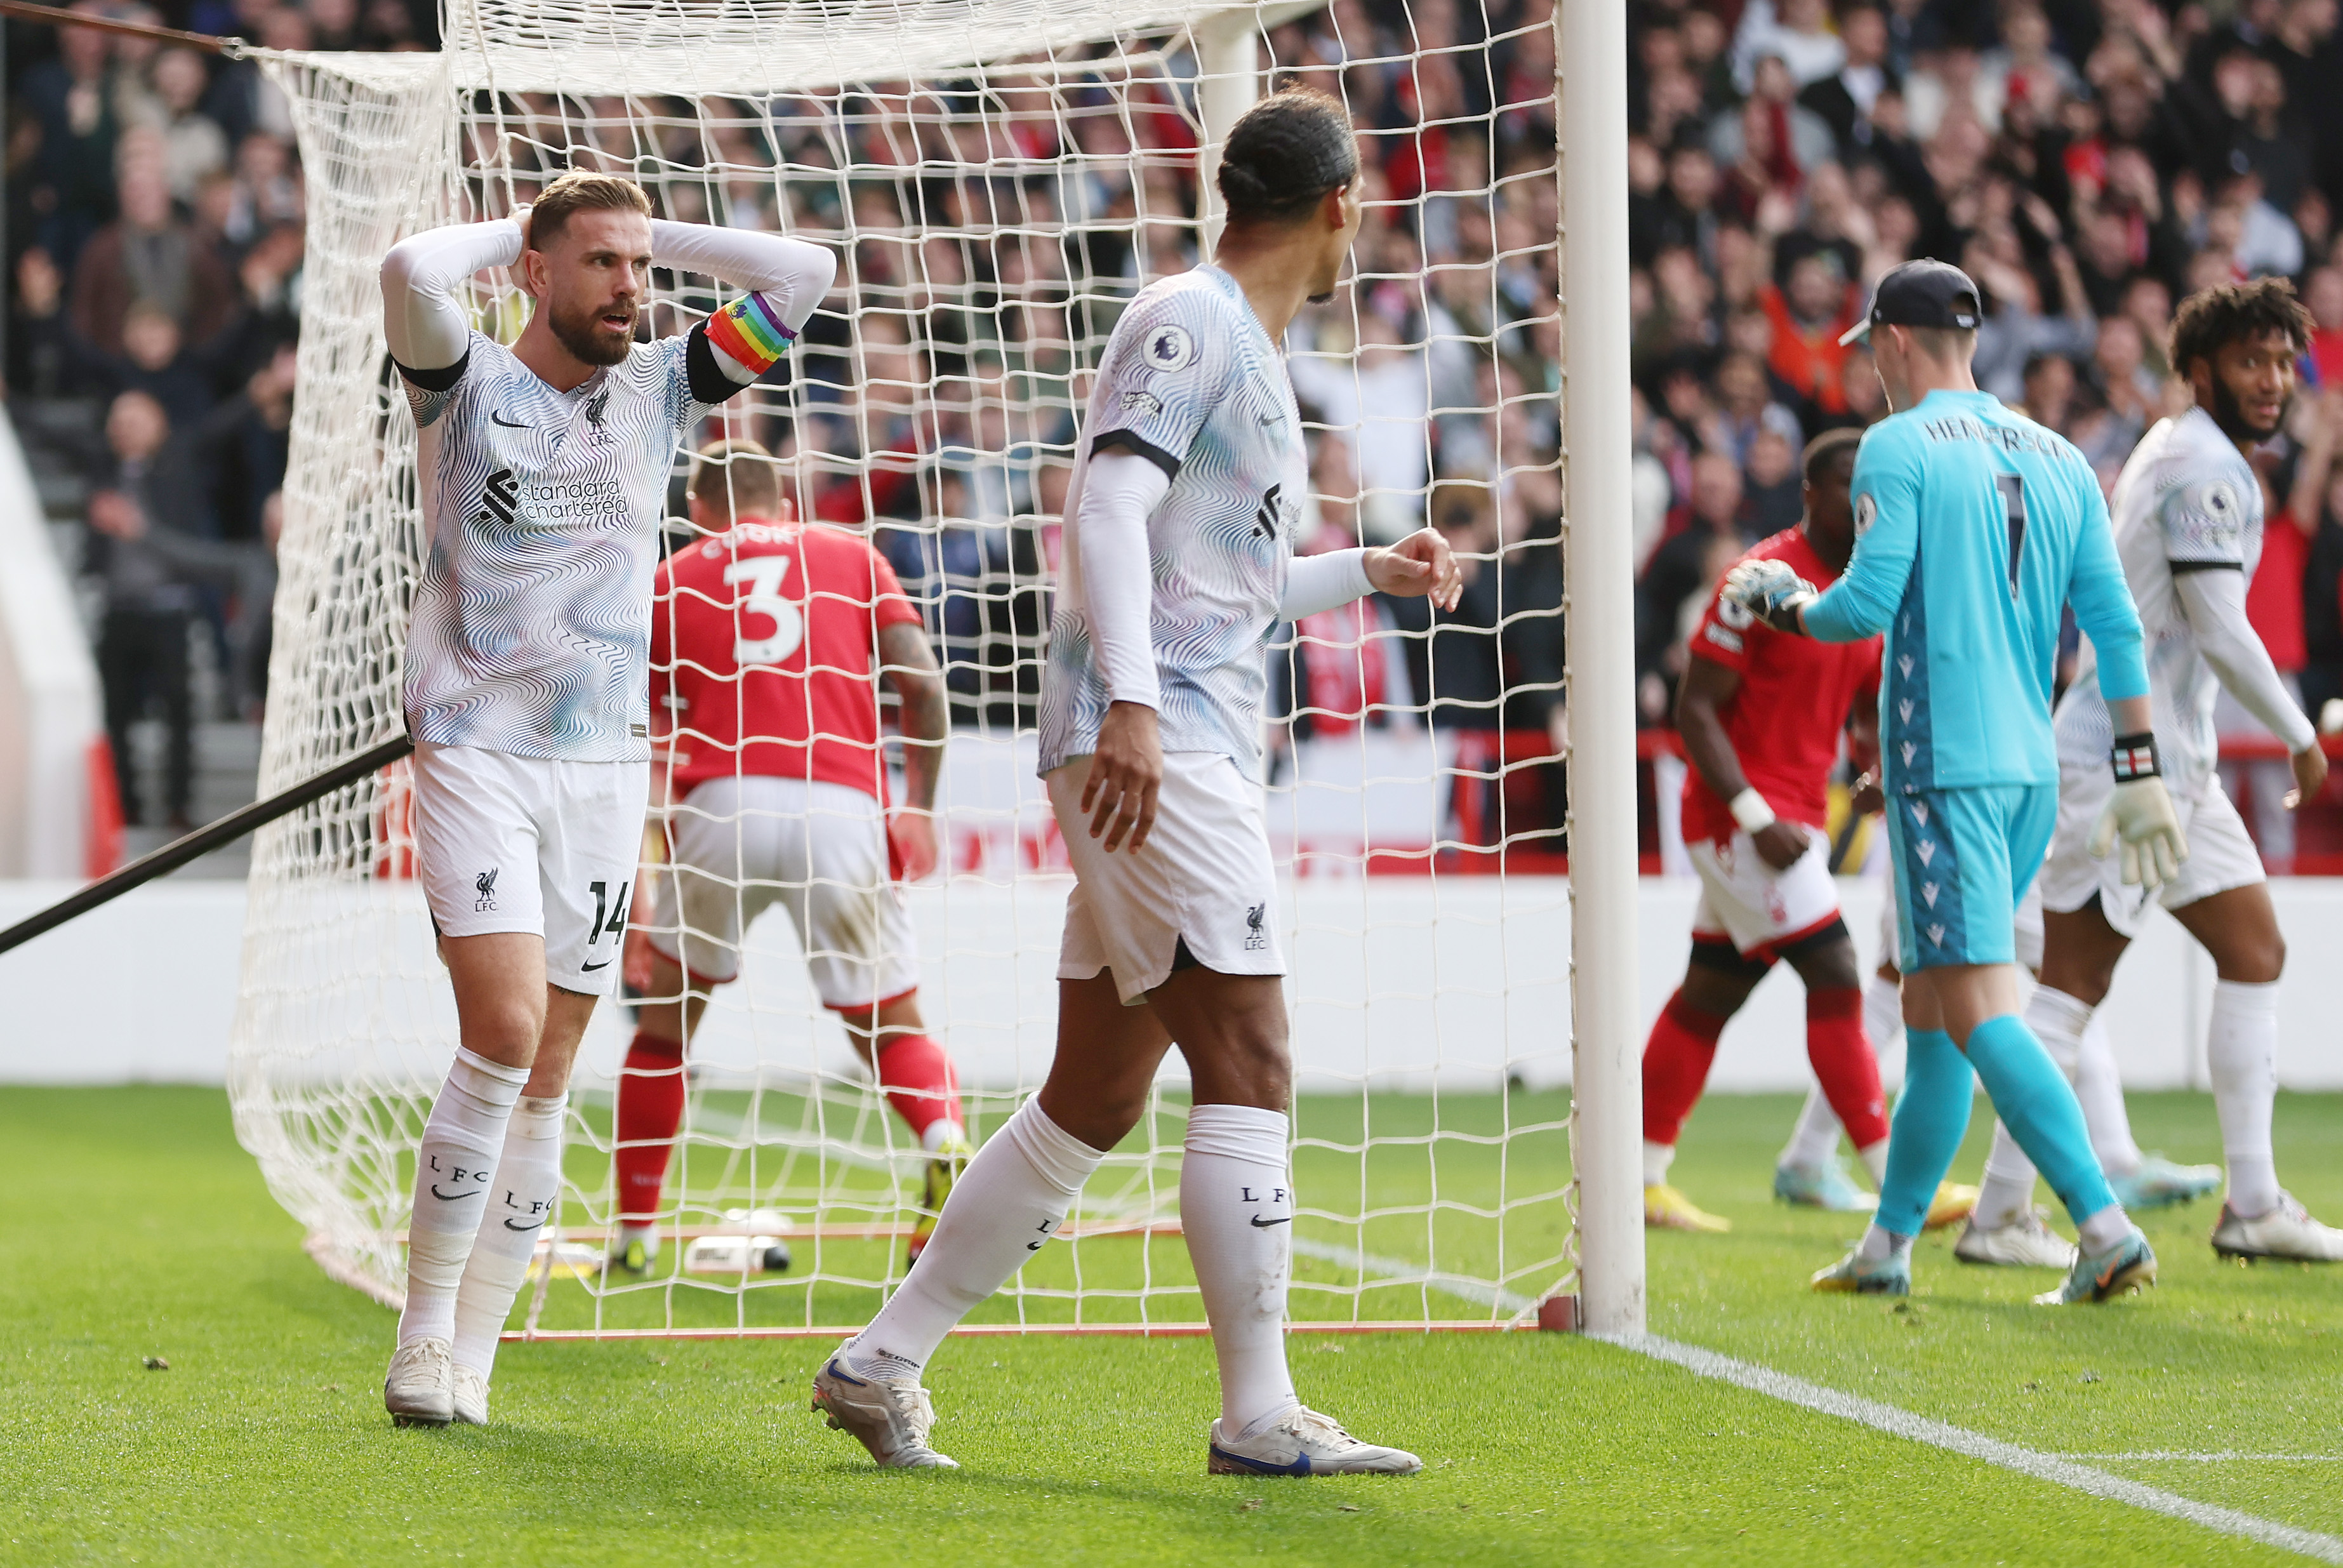 news, scores, highlights, results, Liverpool vs Nottingham Forest